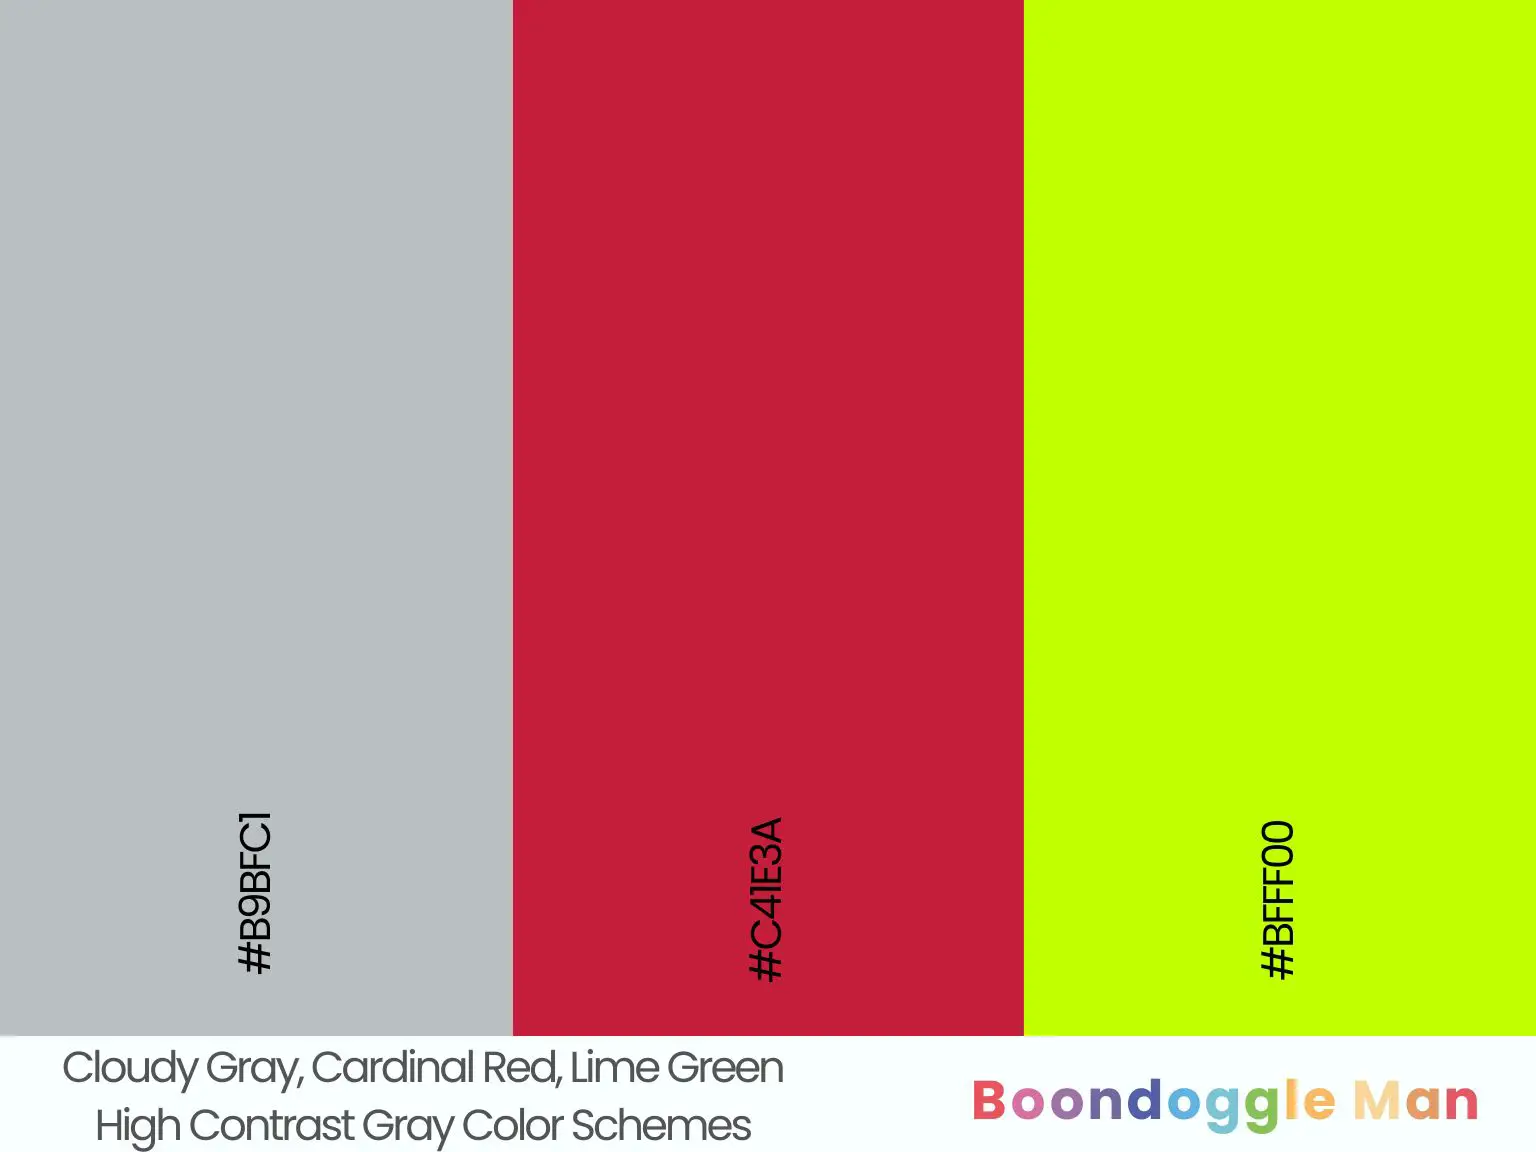 Cloudy Gray, Cardinal Red, Lime Green